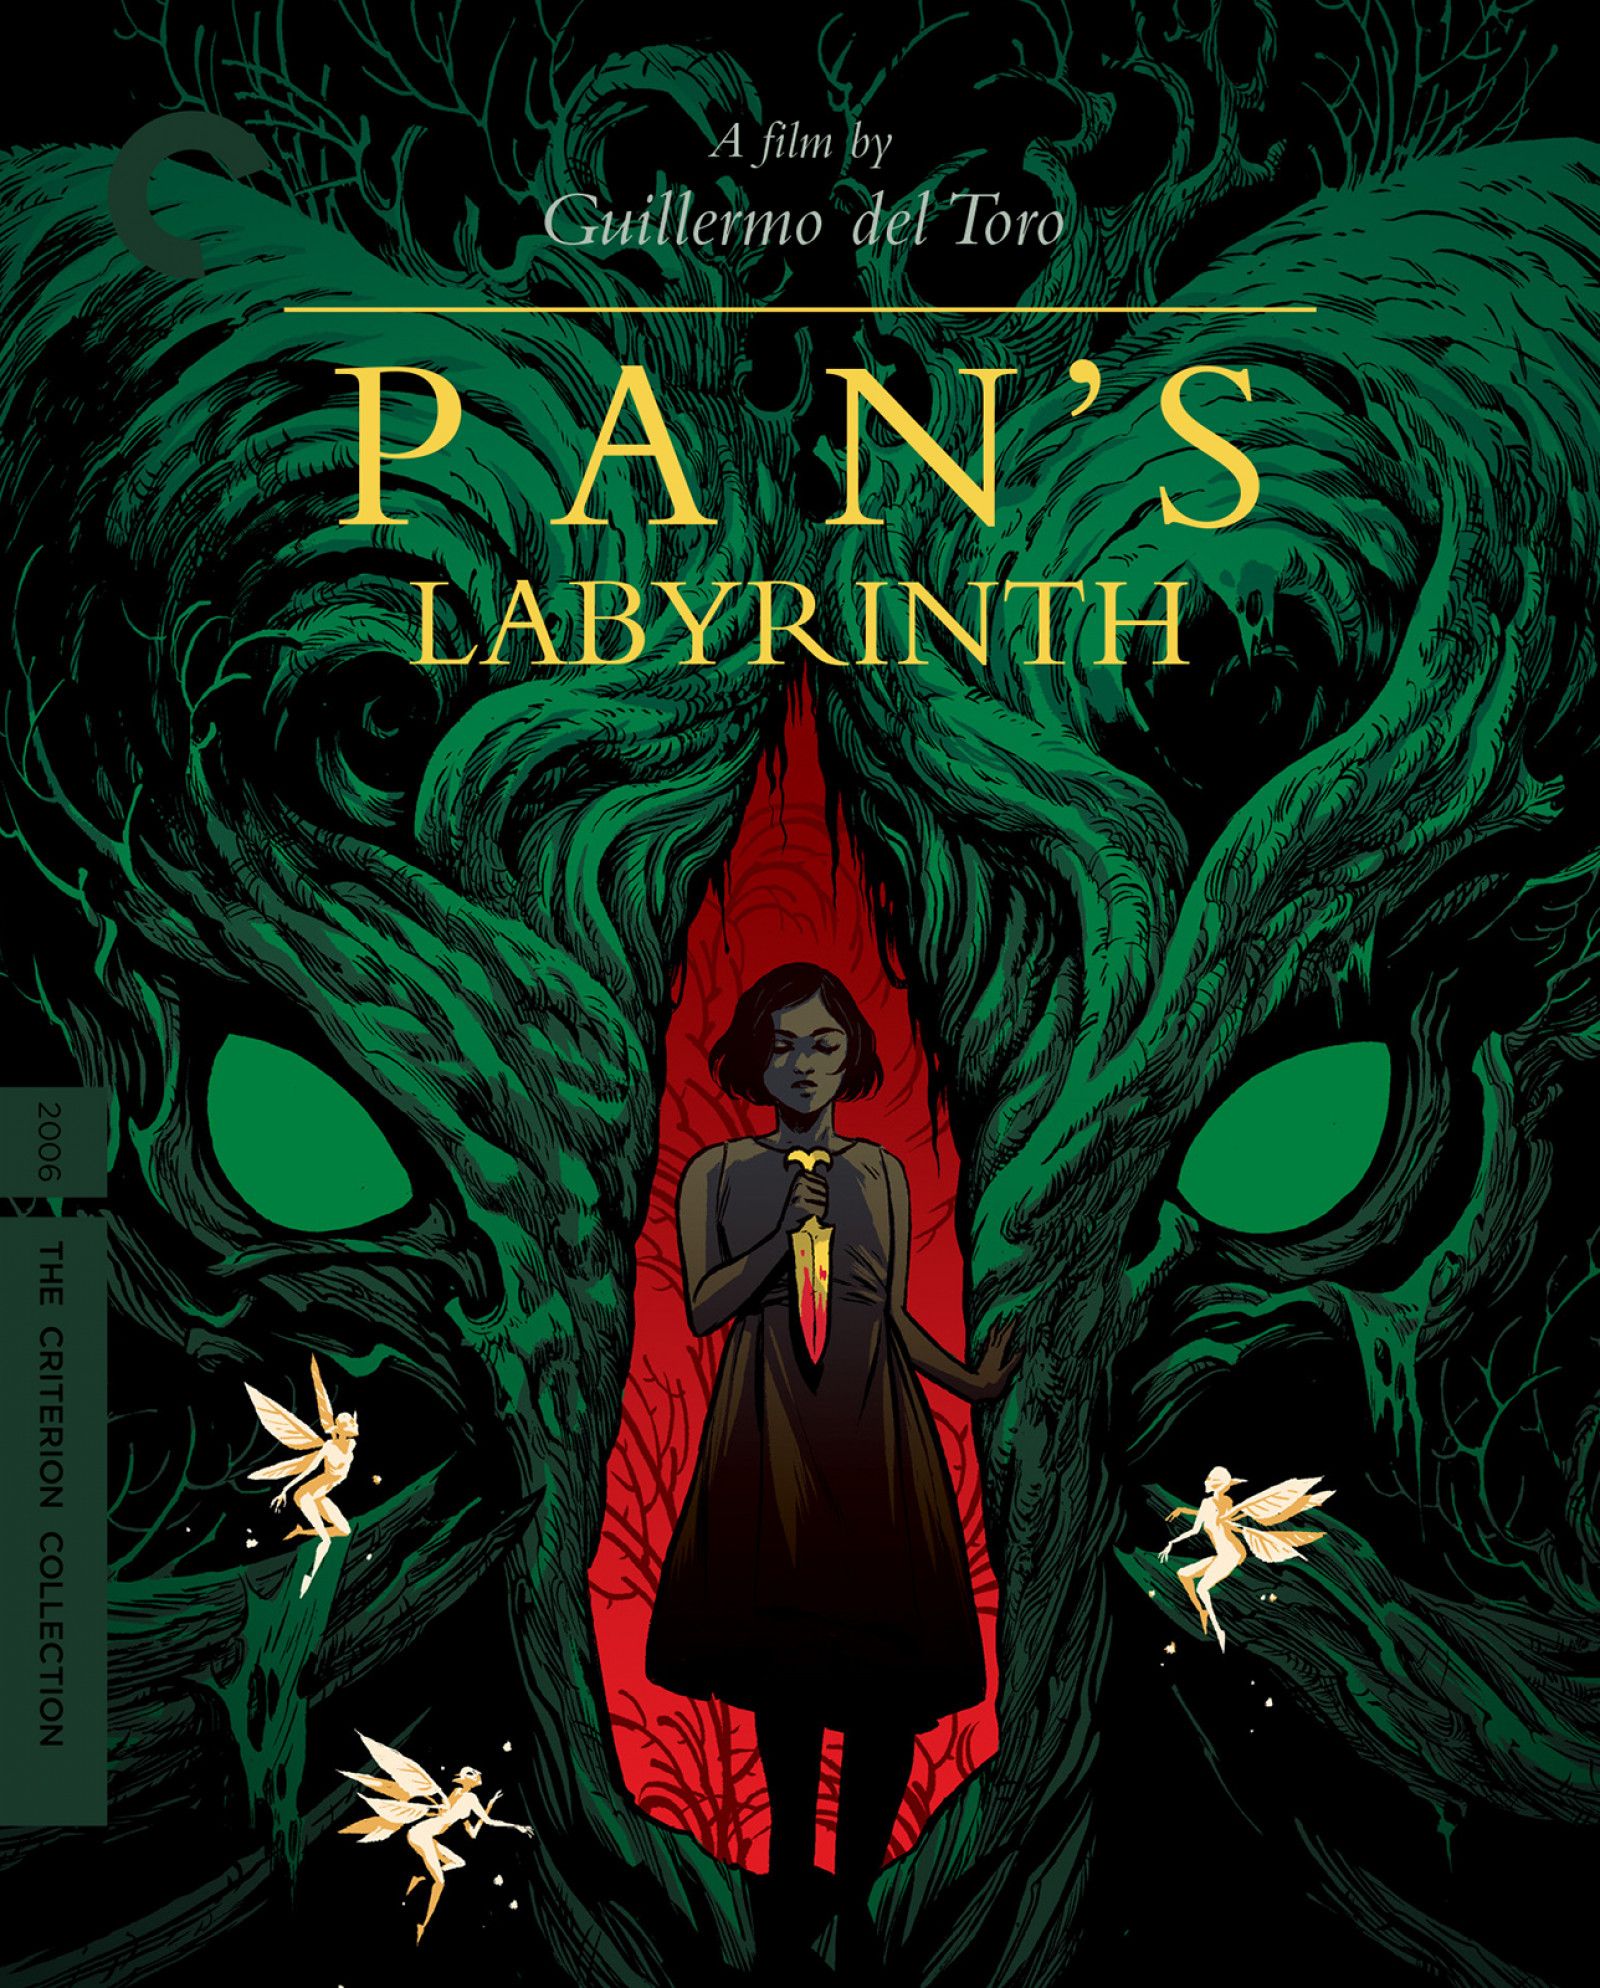 Pan's Labyrinth (2006). The Criterion Collection